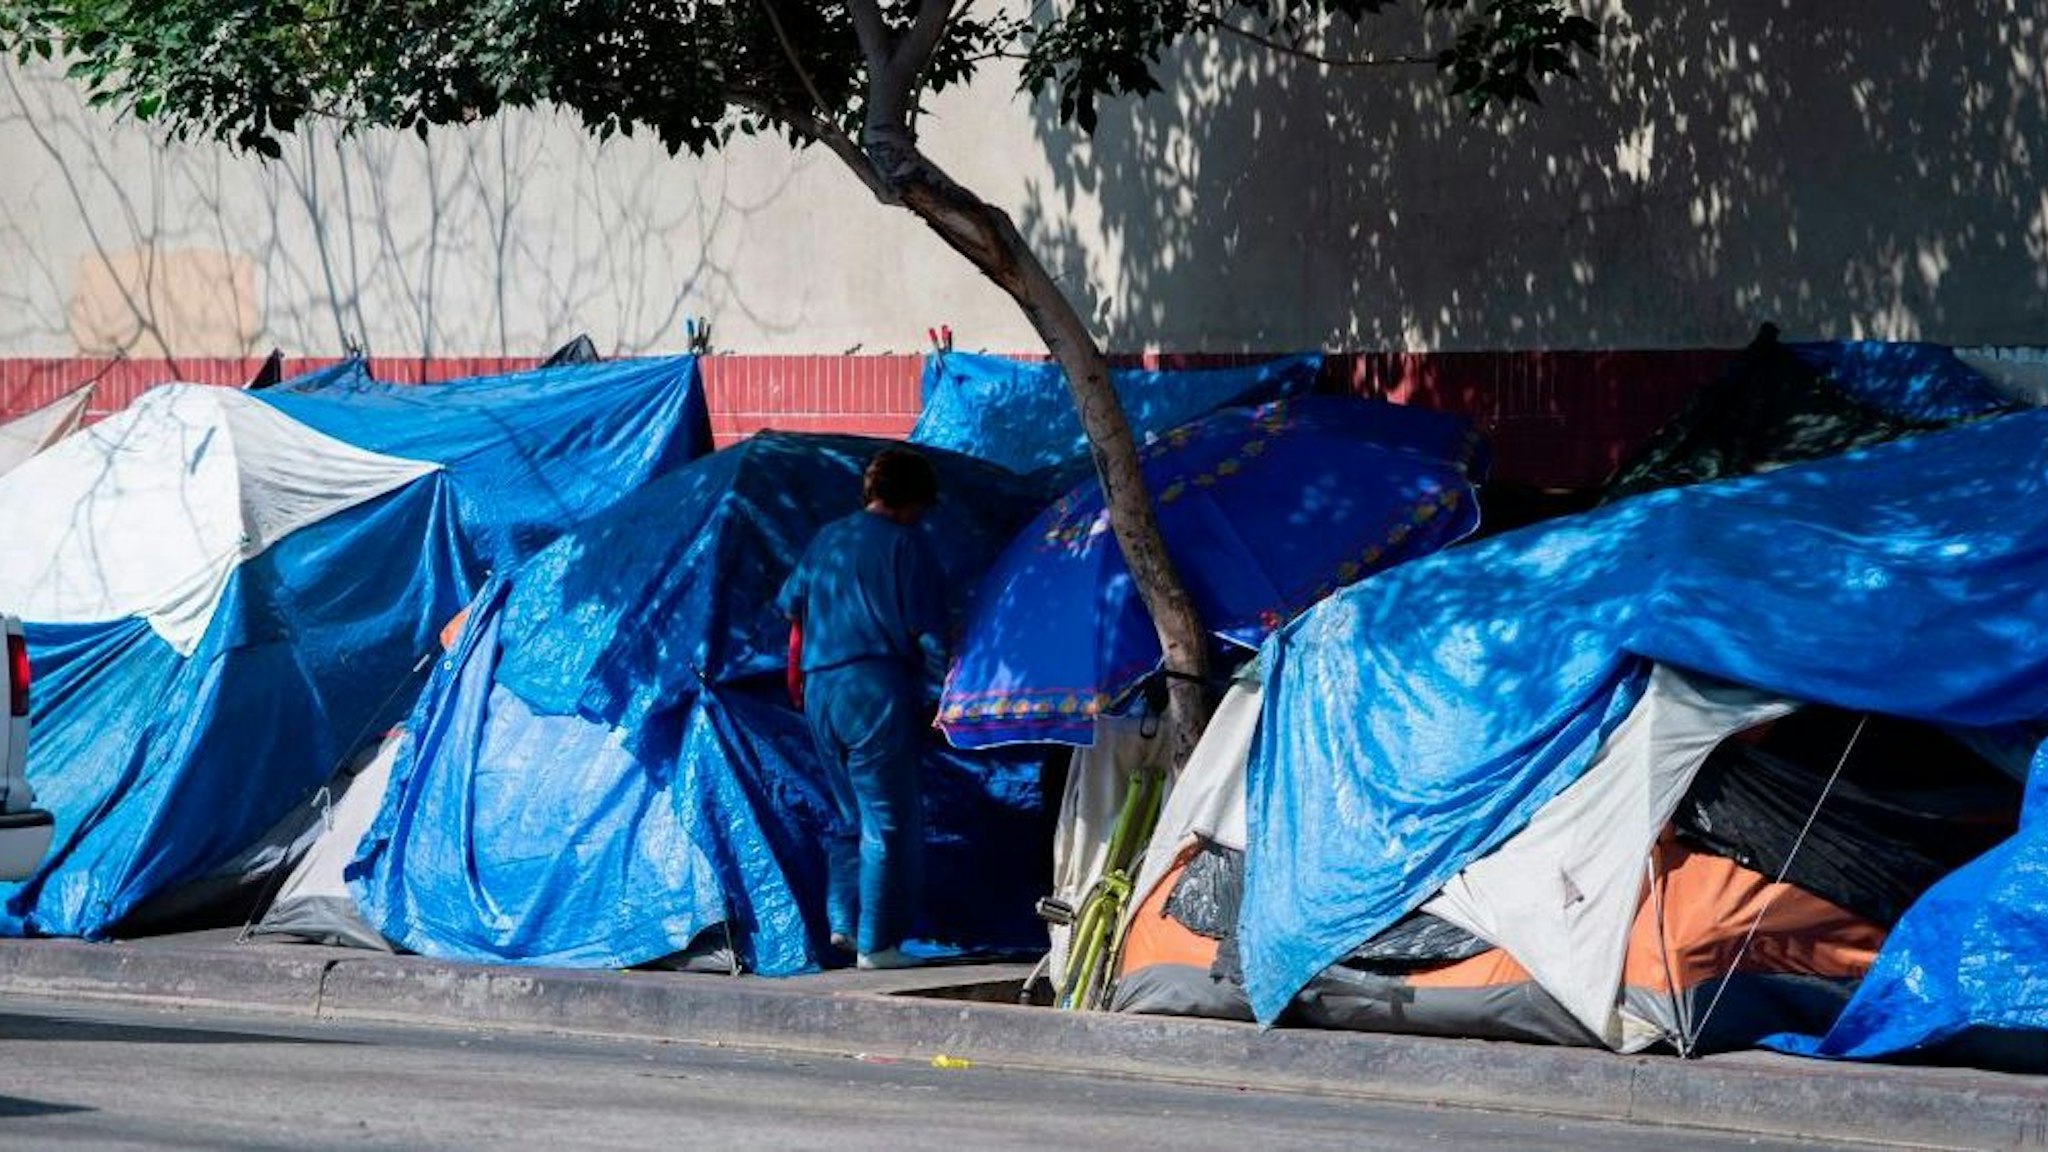 Tents line the street in Skid Row in Los Angeles, California on September 17, 2019.